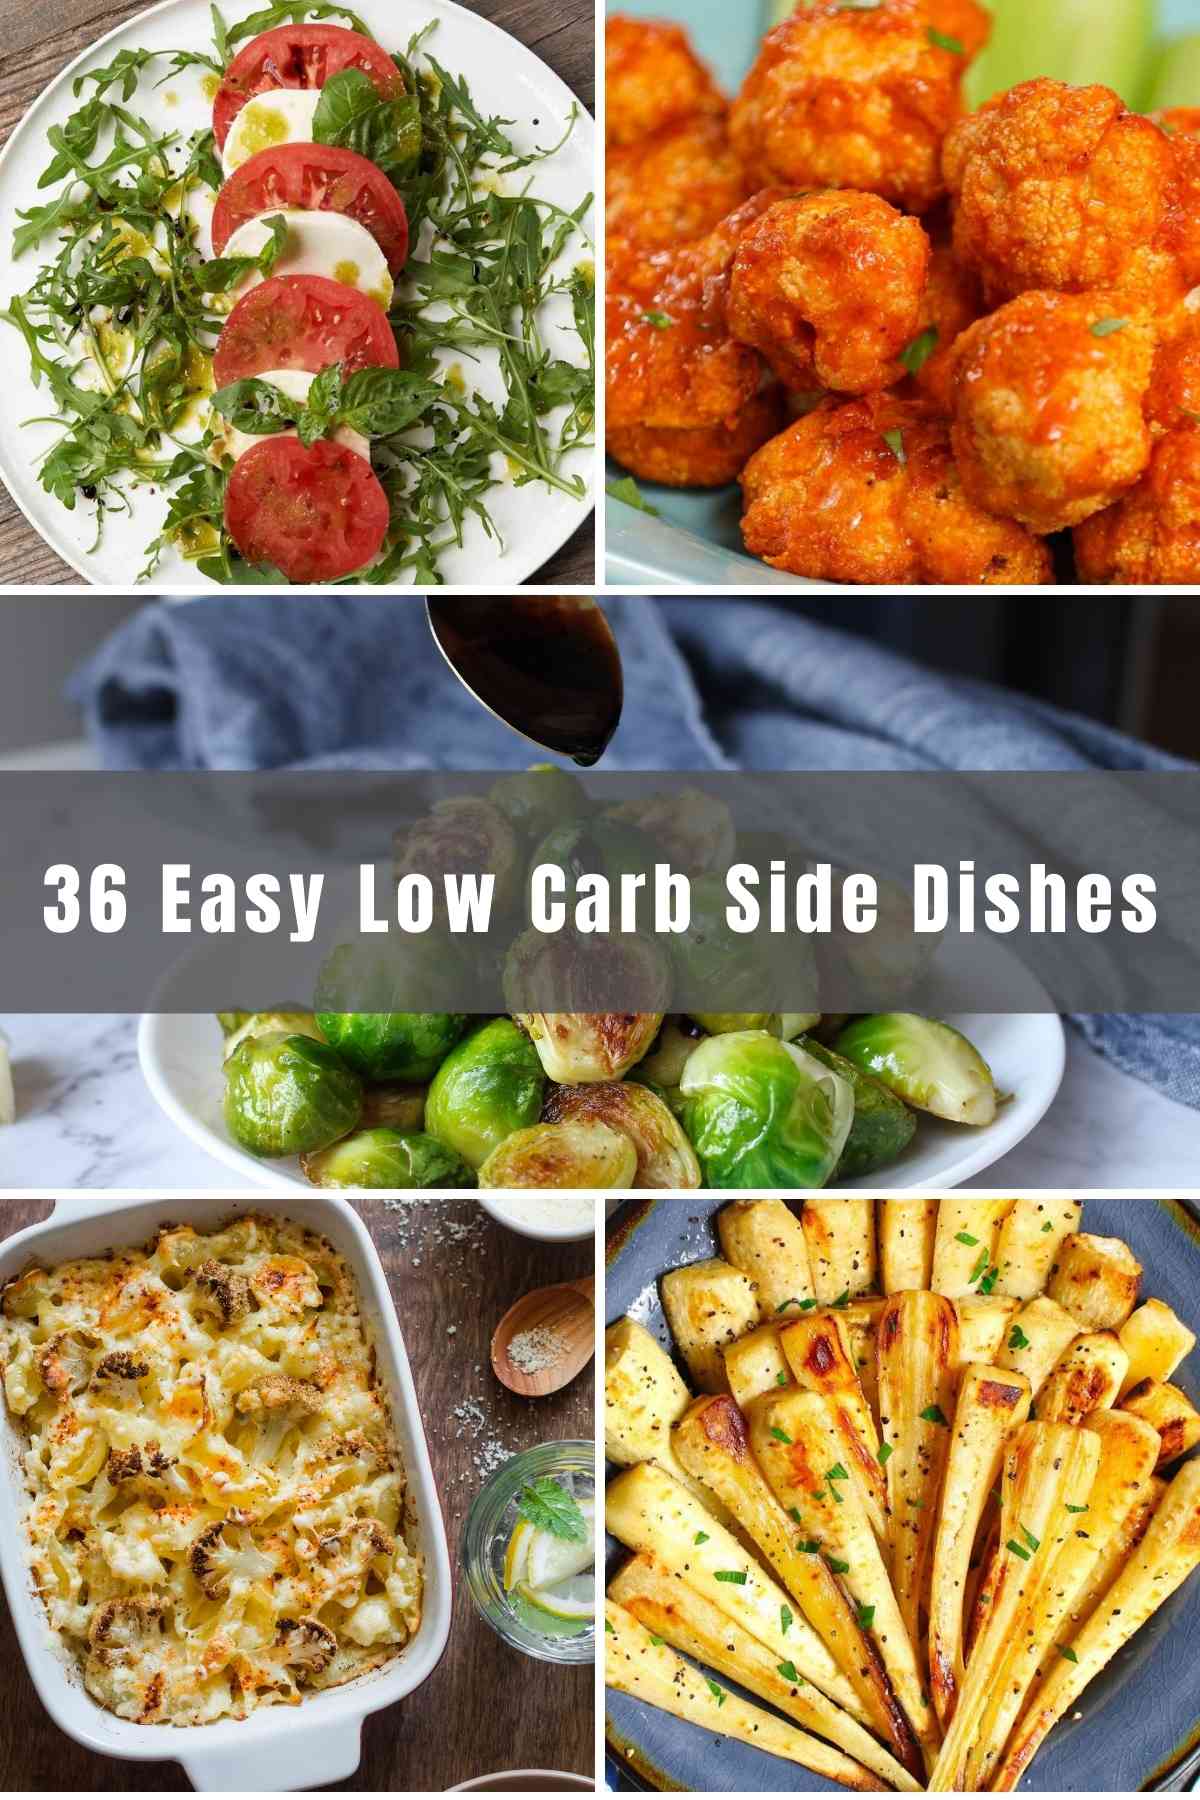 It’s that time of year again, when we all start looking at our eating habits and how we can improve our health. For some of us, the answer is to reduce carbs. Below you will find 36 low carb side dishes that are tasty and easy to make!